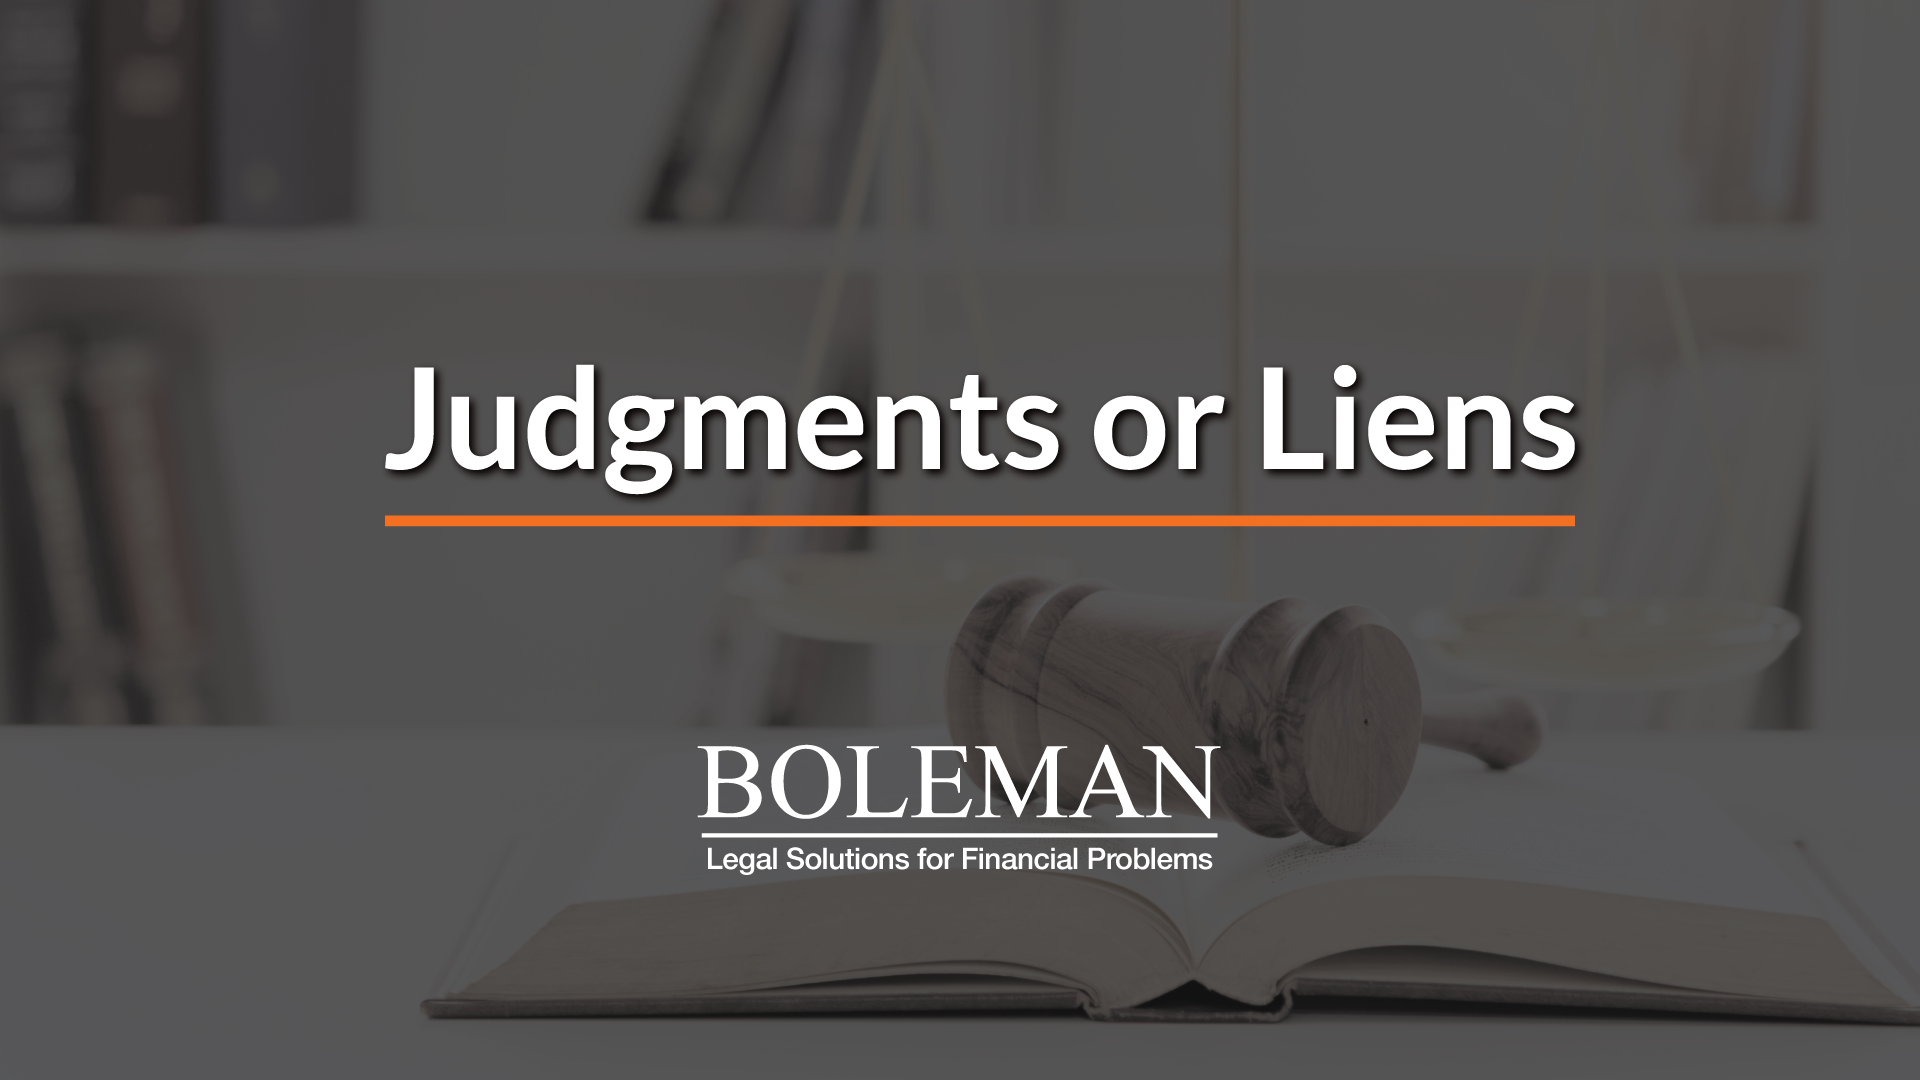 Judgments or Liens